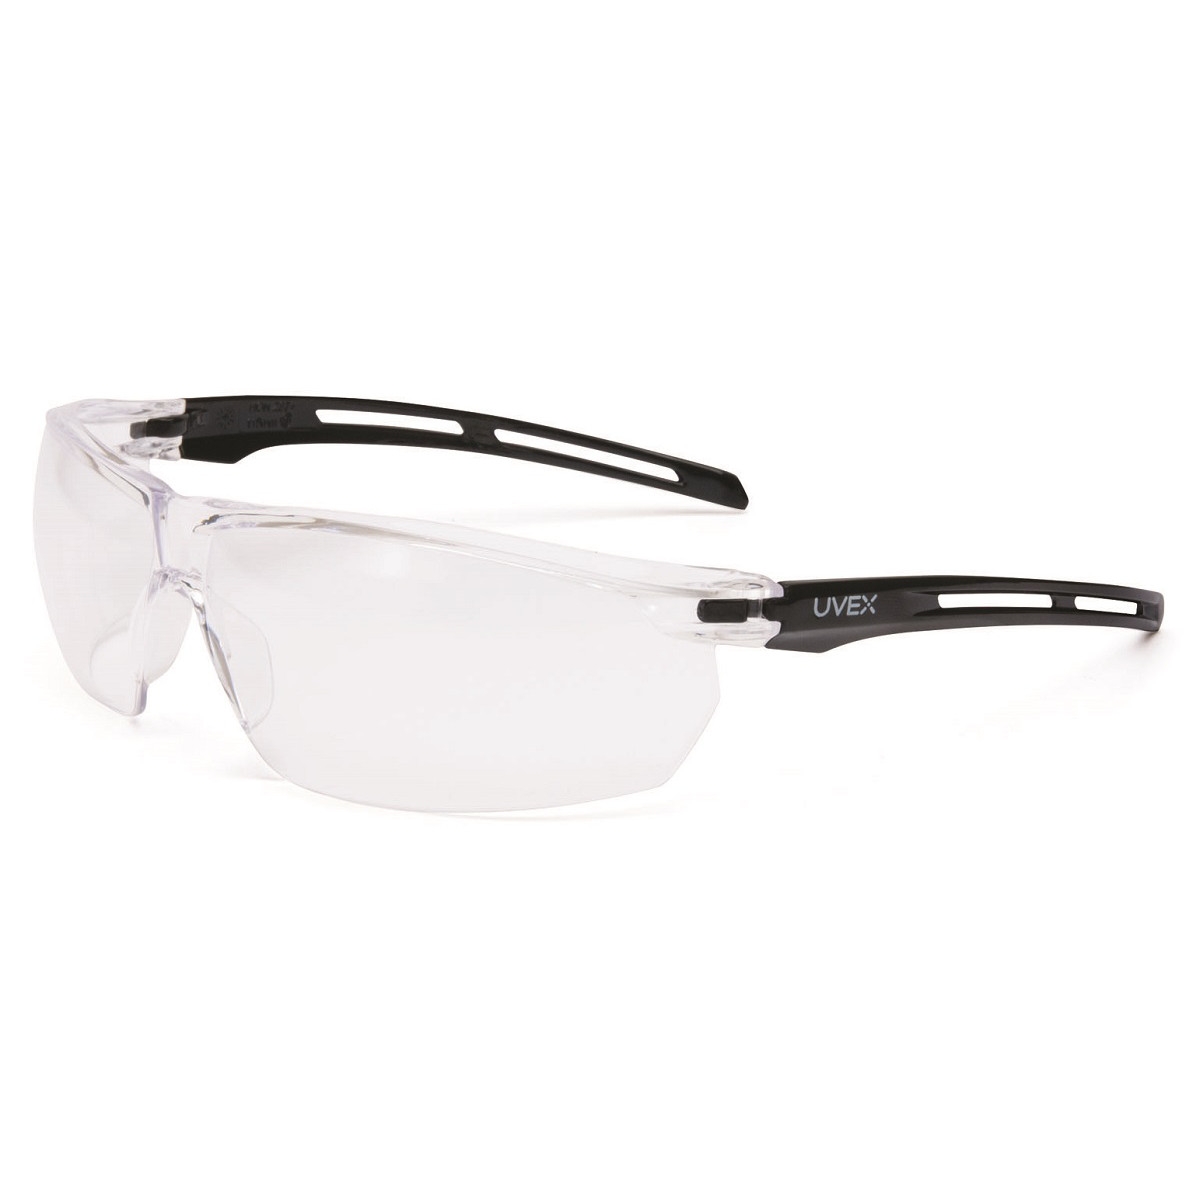 Uvex S4040 Tirade Safety Glasses/Goggles - Black Temples - Clear Anti ...